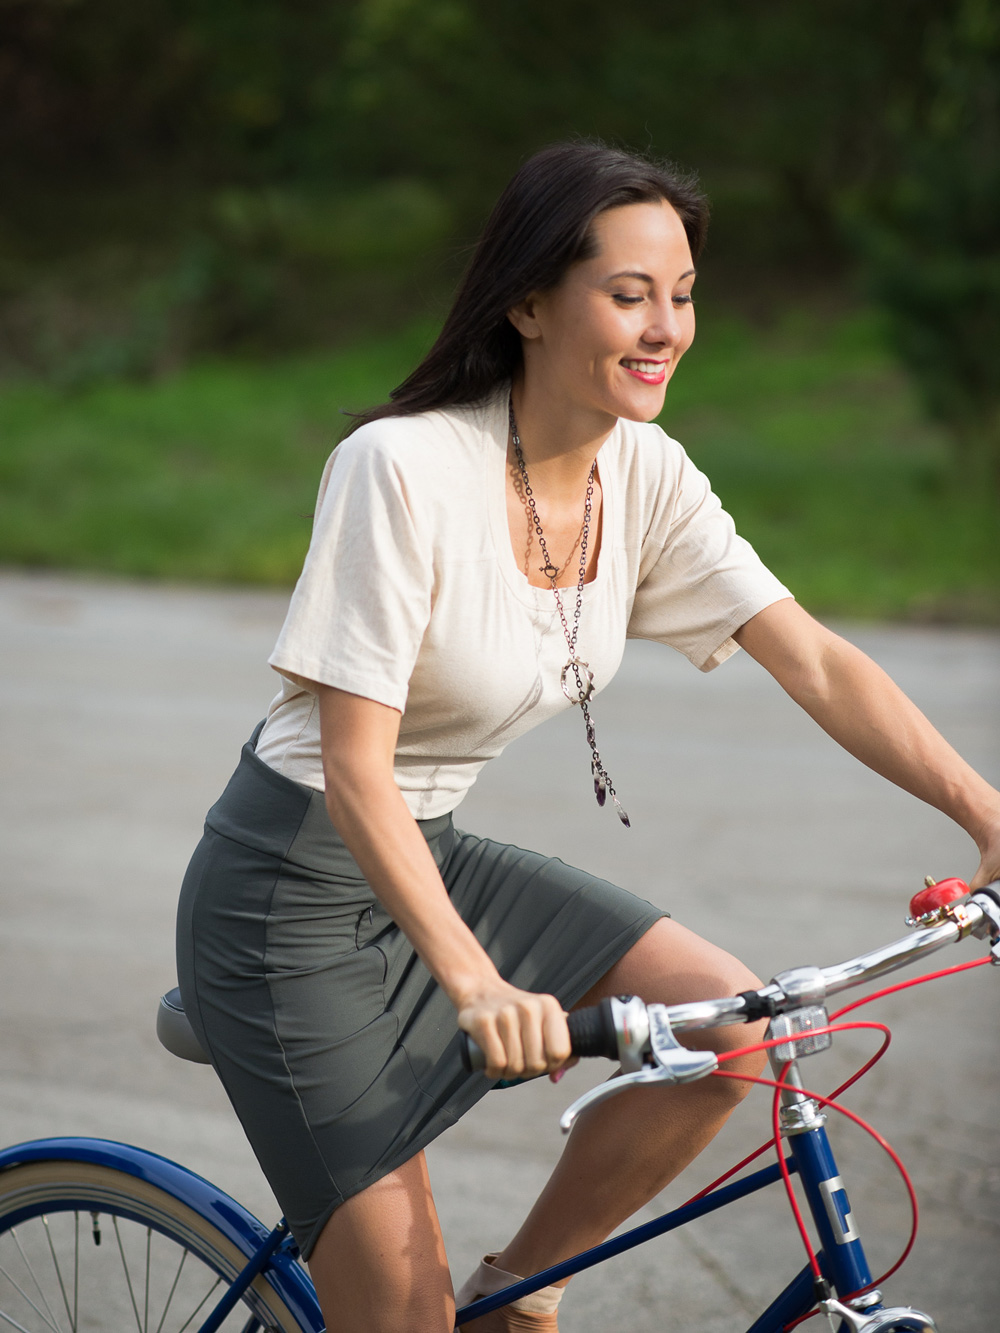 ride-a-bike-in-a-skirt-and-this-cute-top